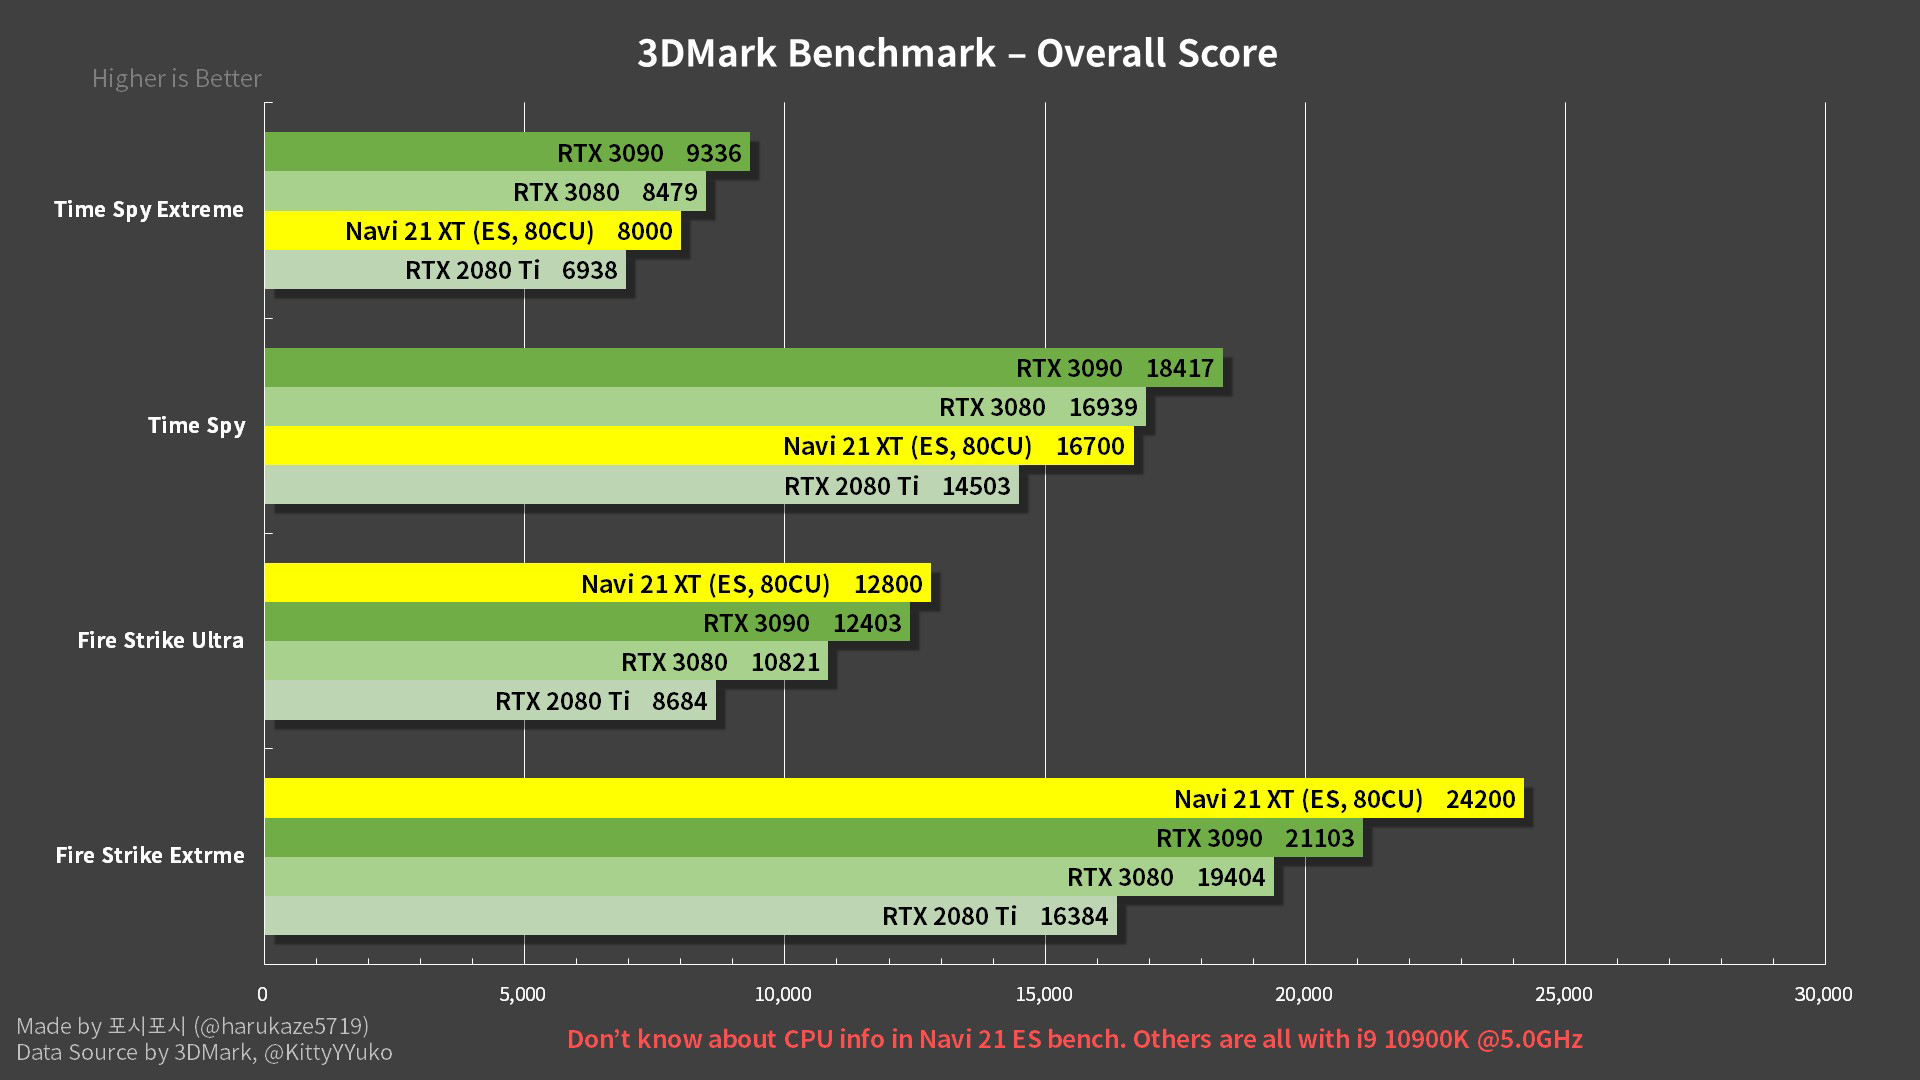 AMD RX 6800 and 6800 XT review: Big Navi means AMD is finally competitive